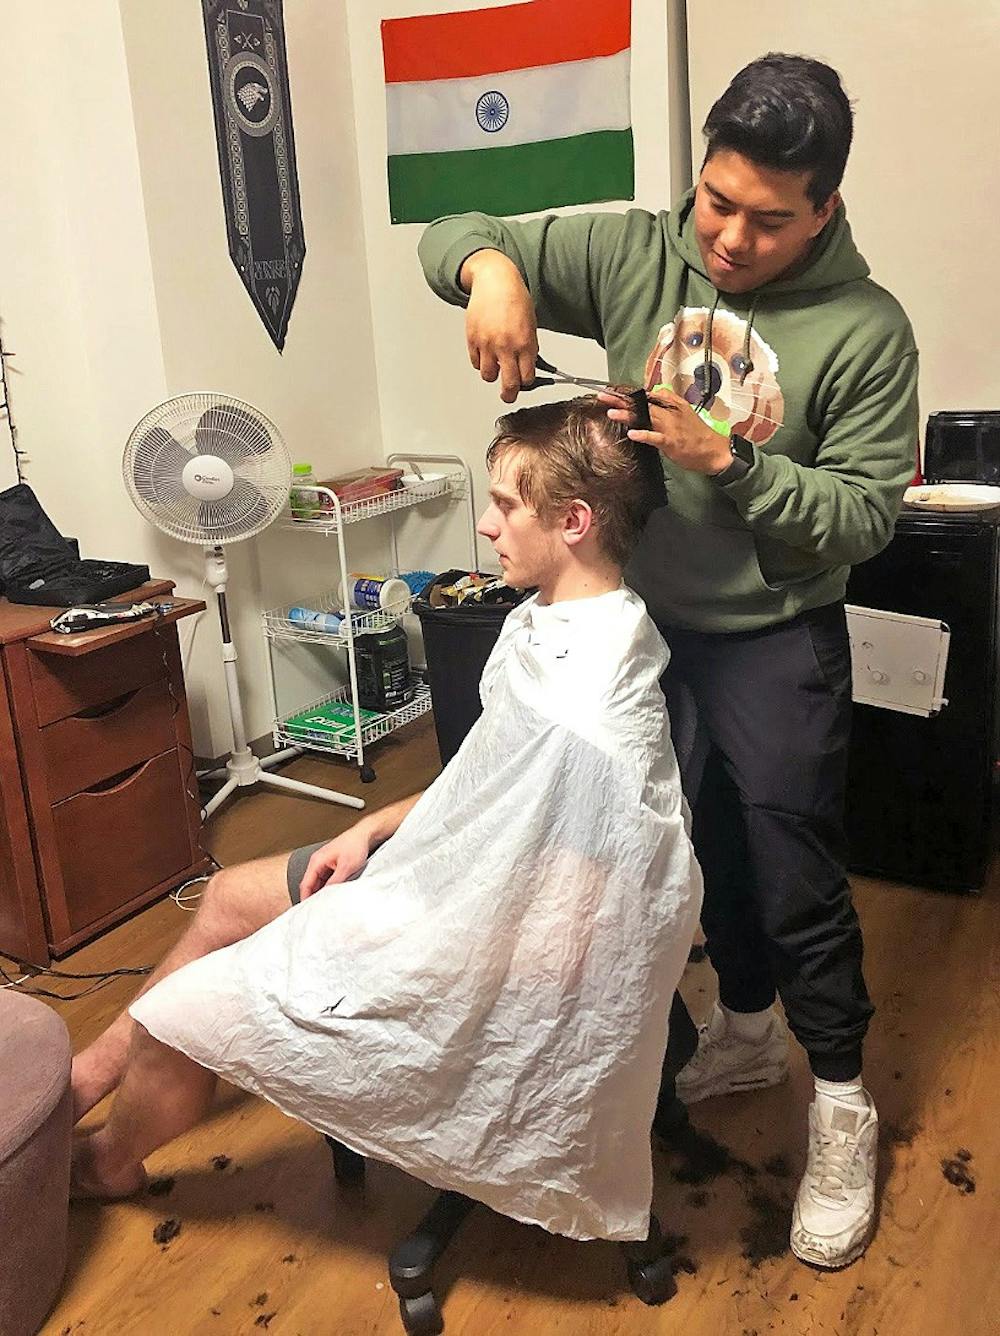 Tucson snips and socializes giving his clients a unique haircutting experience.